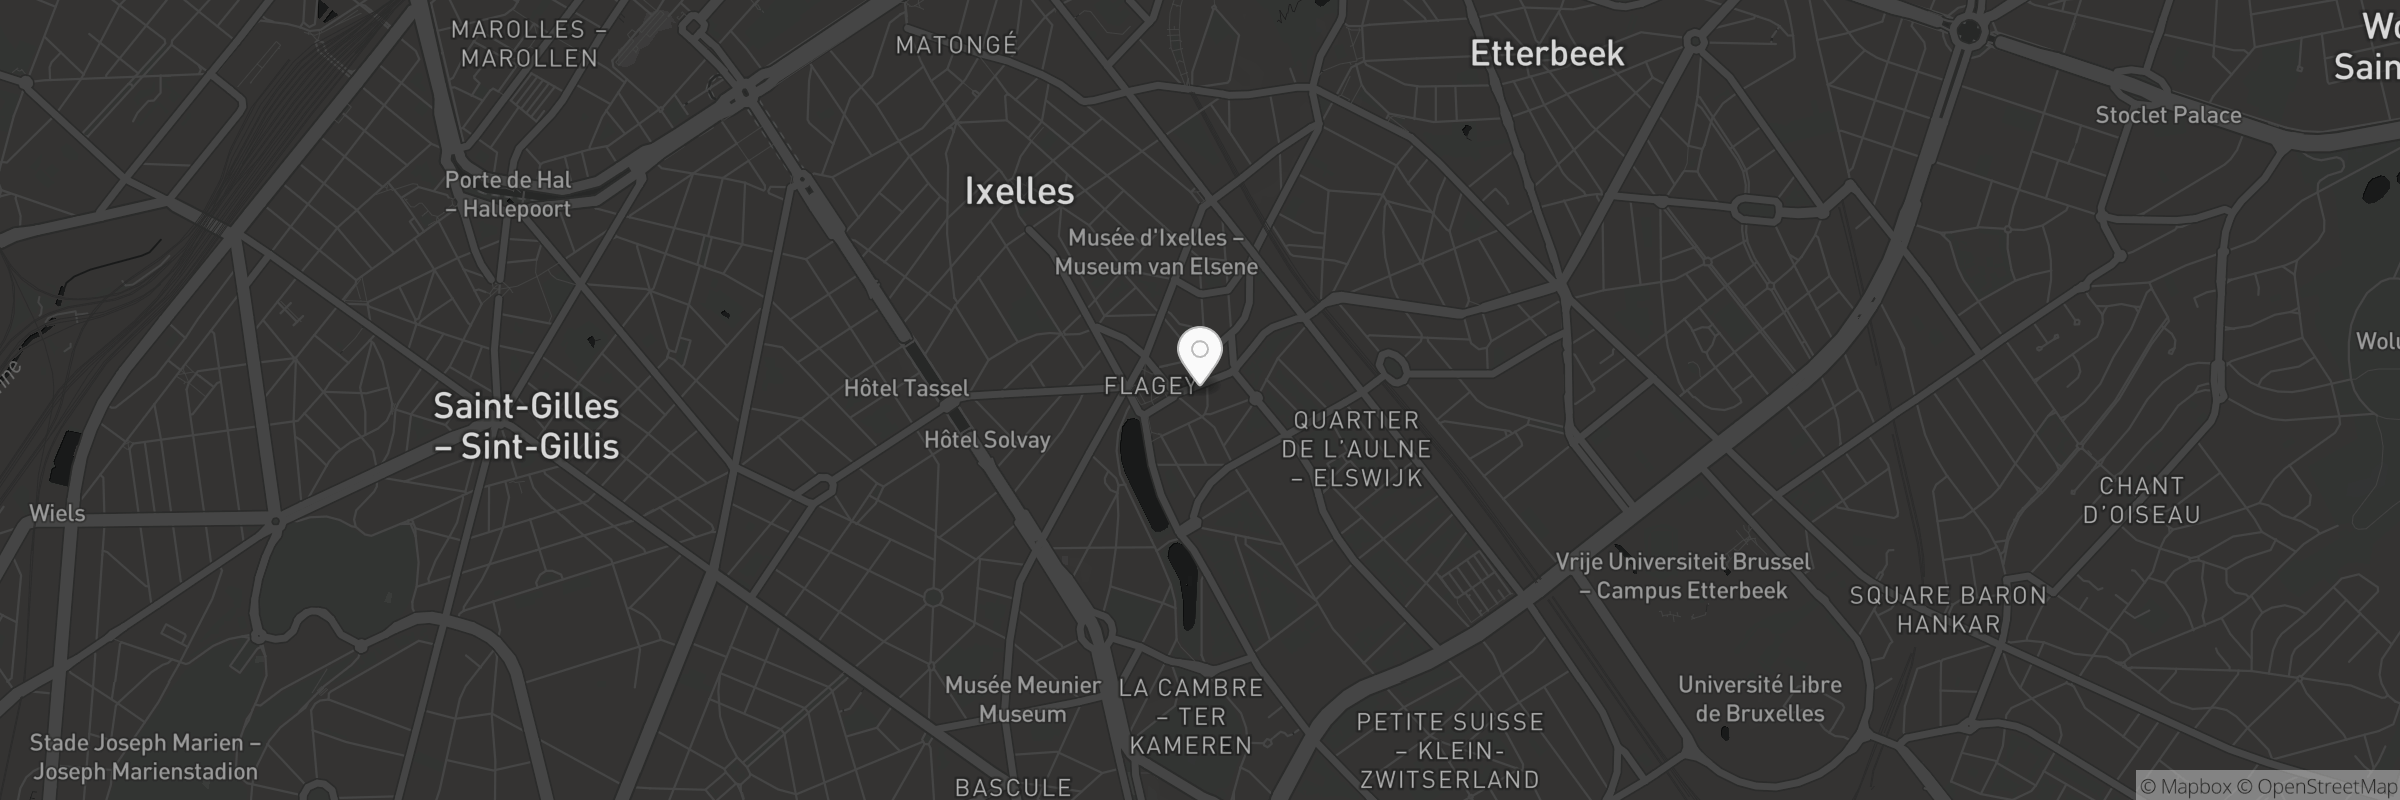 Map showing the address of Ixelles